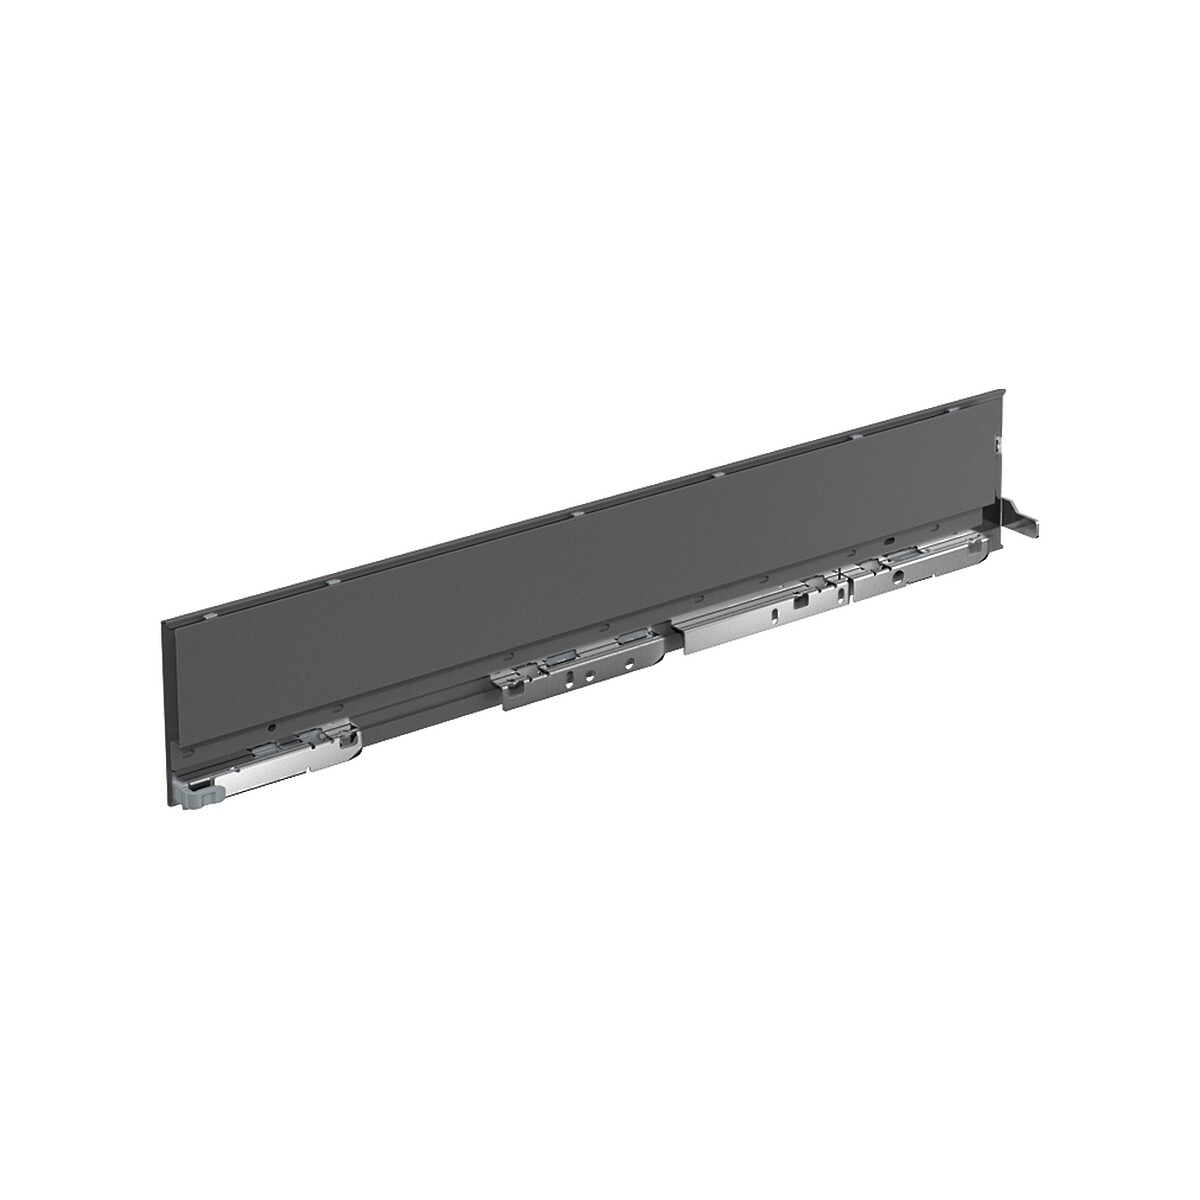 AvanTech YOU Drawer side profile, height 101 mm x NL 550 mm, Anthracite, Right